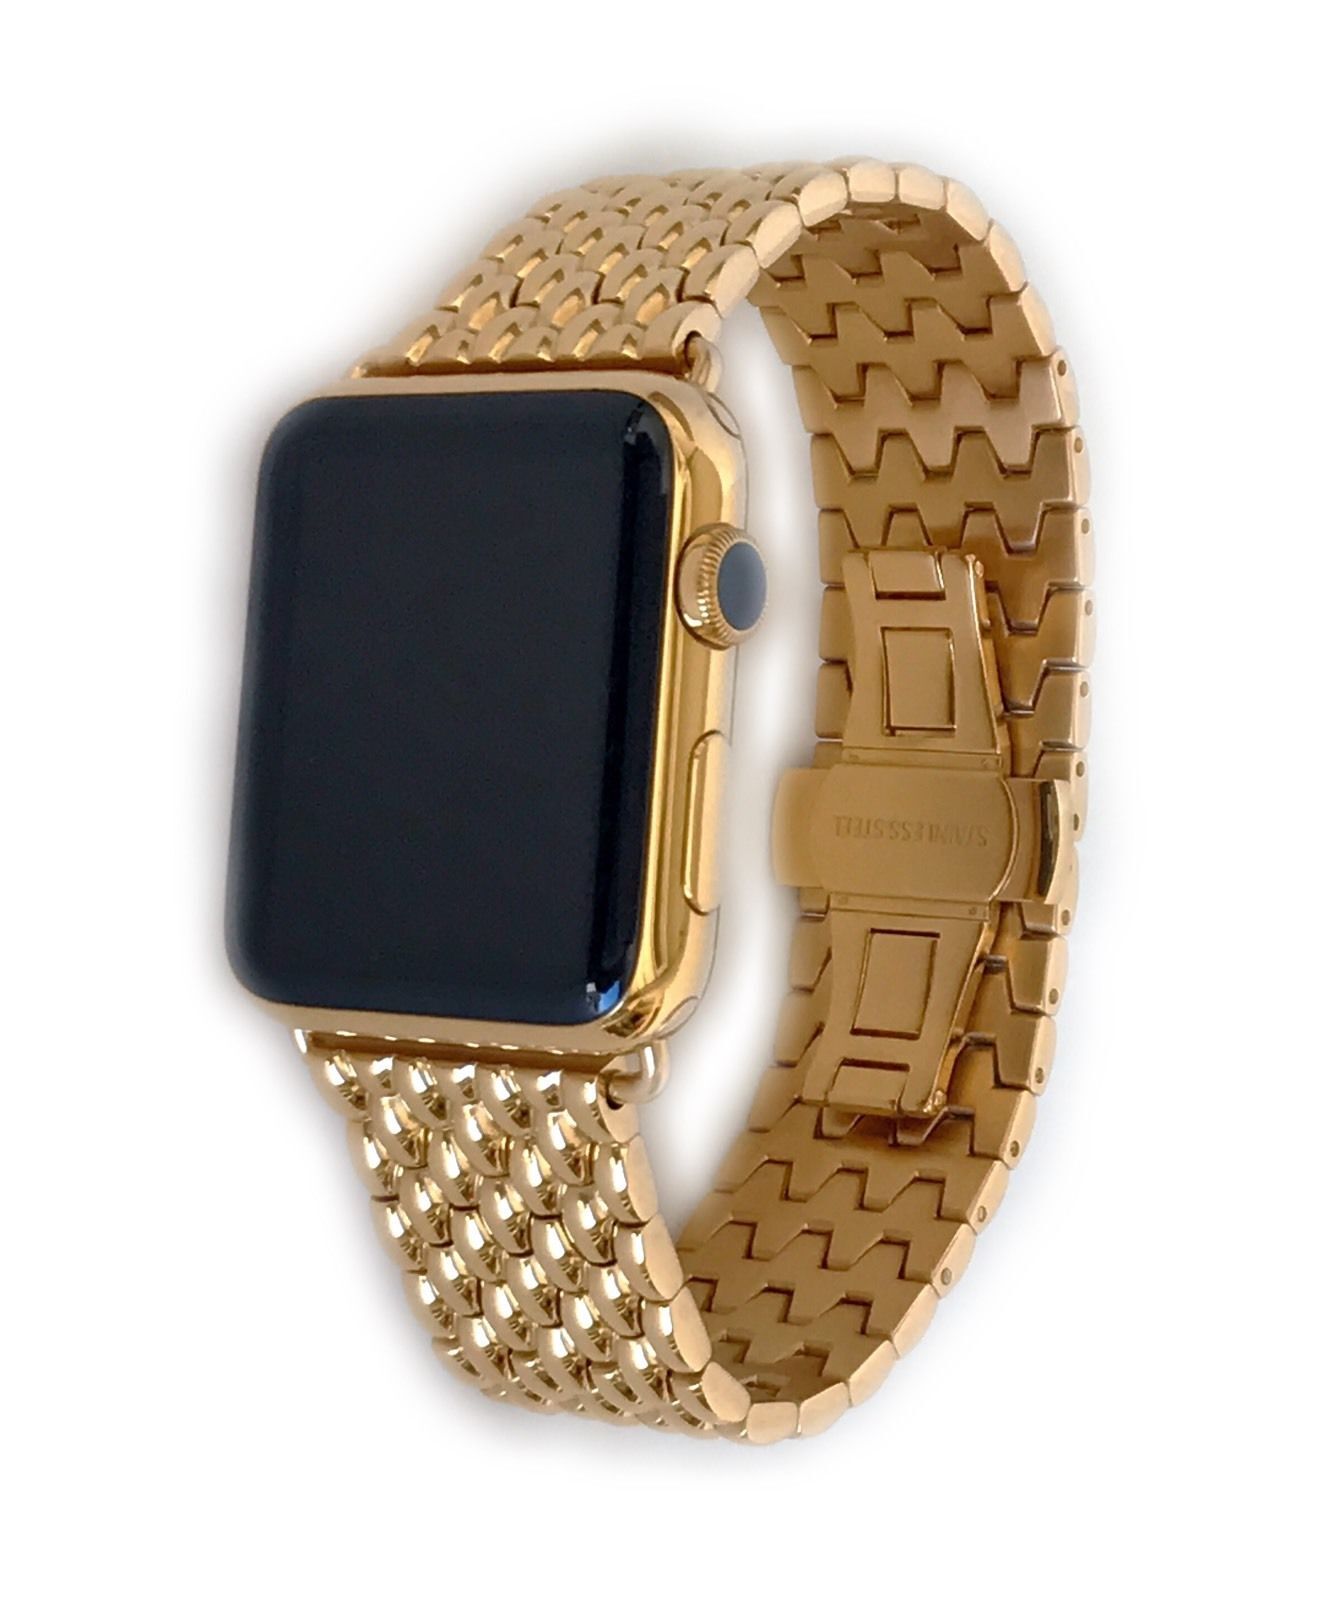 24K Gold Apple Watch Stainless Steel with 24K Gold Links Butterfly Band Does Gold Stainless Steel Apple Watch Scratch